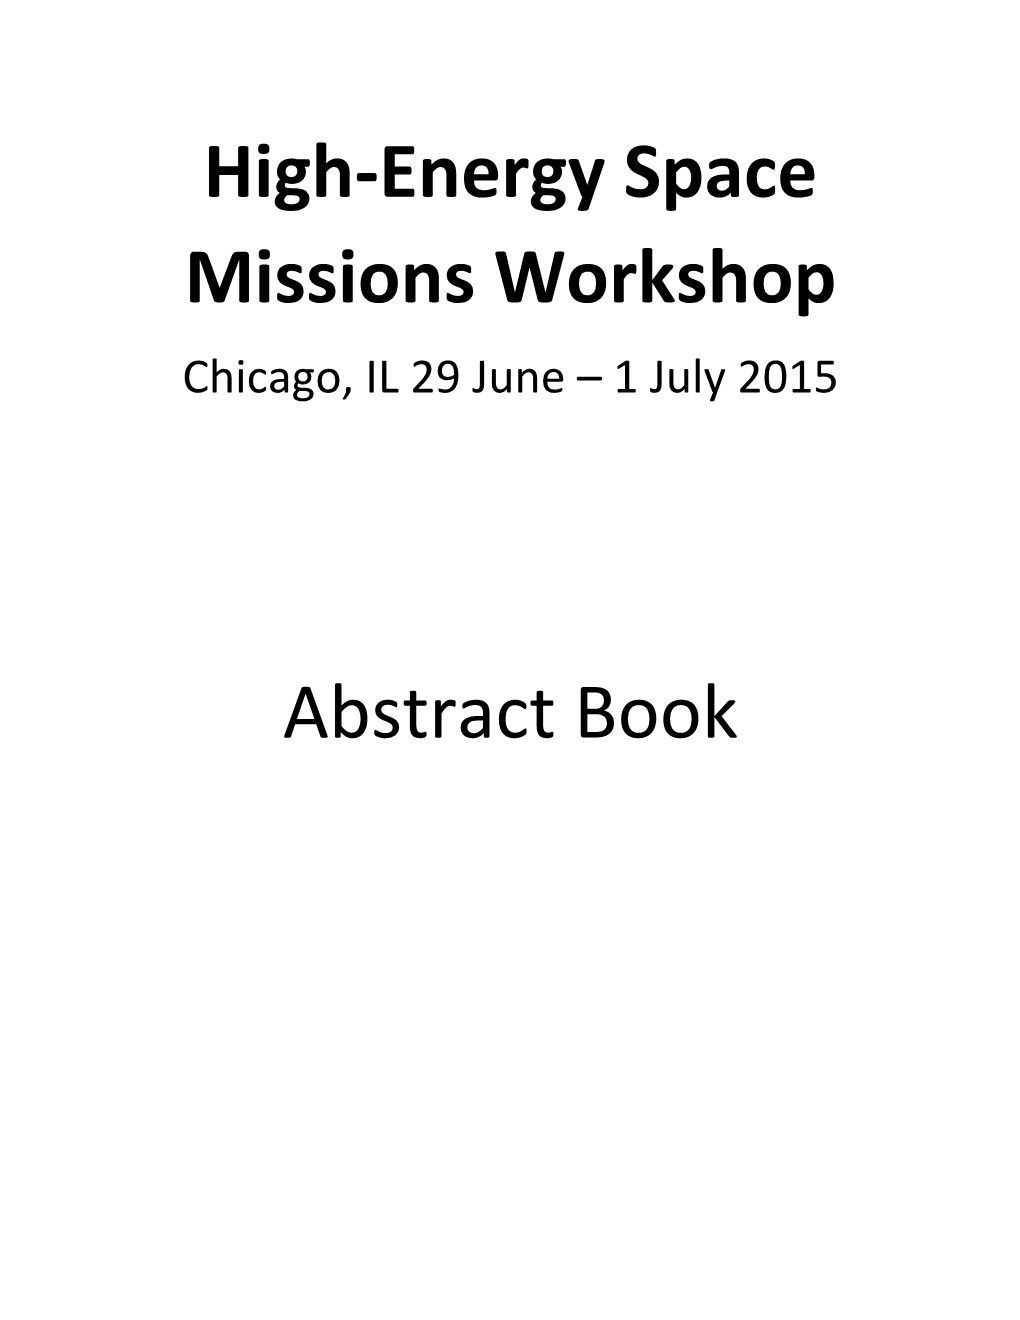 Download PDF of Abstracts